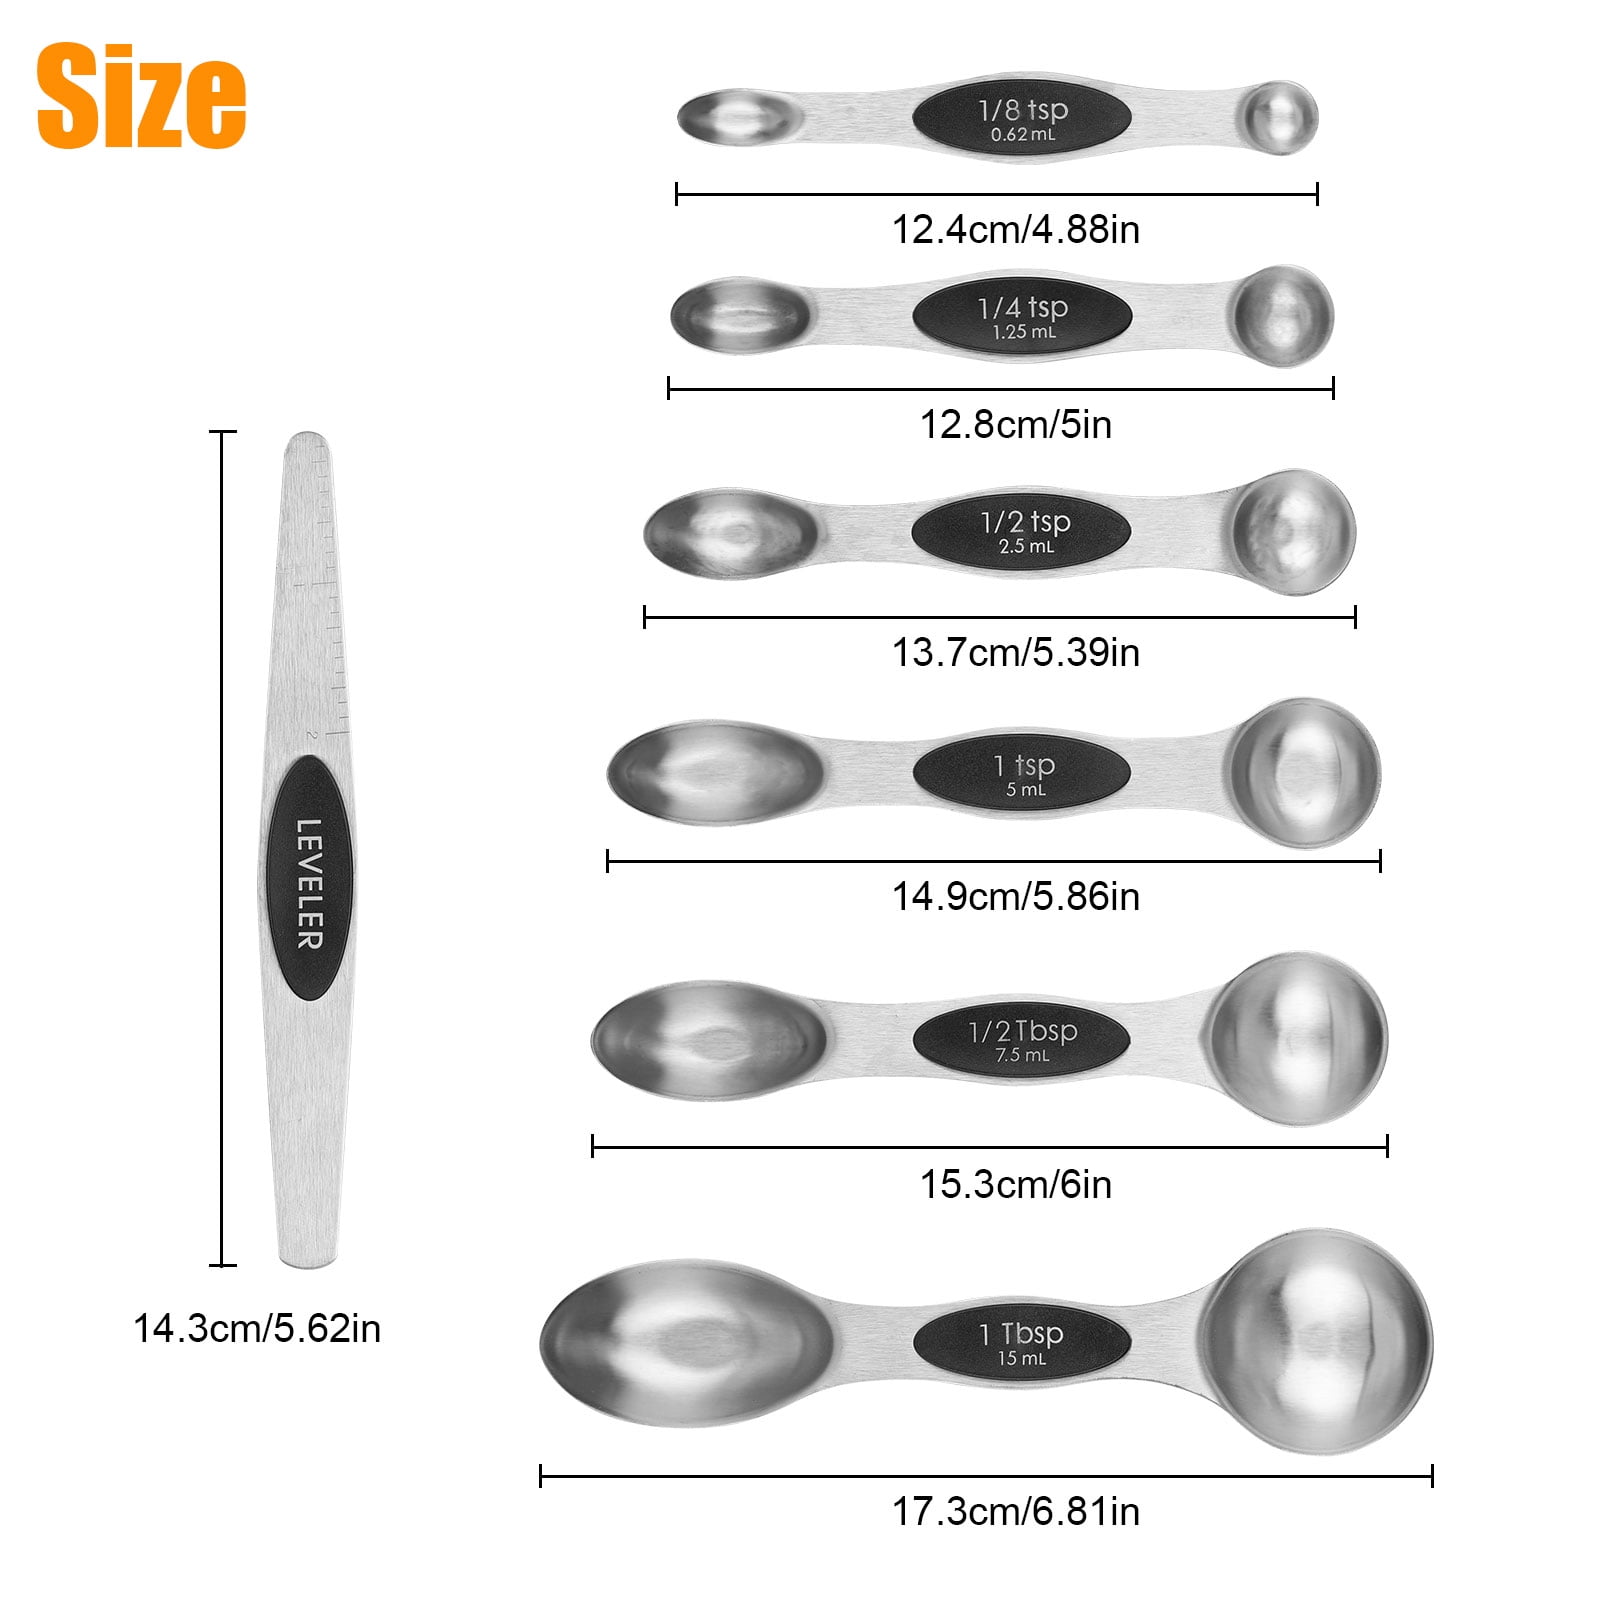 AllSpice Stainless Steel Double Sided Measuring Spoon- Teaspoon and  Tablespoon 